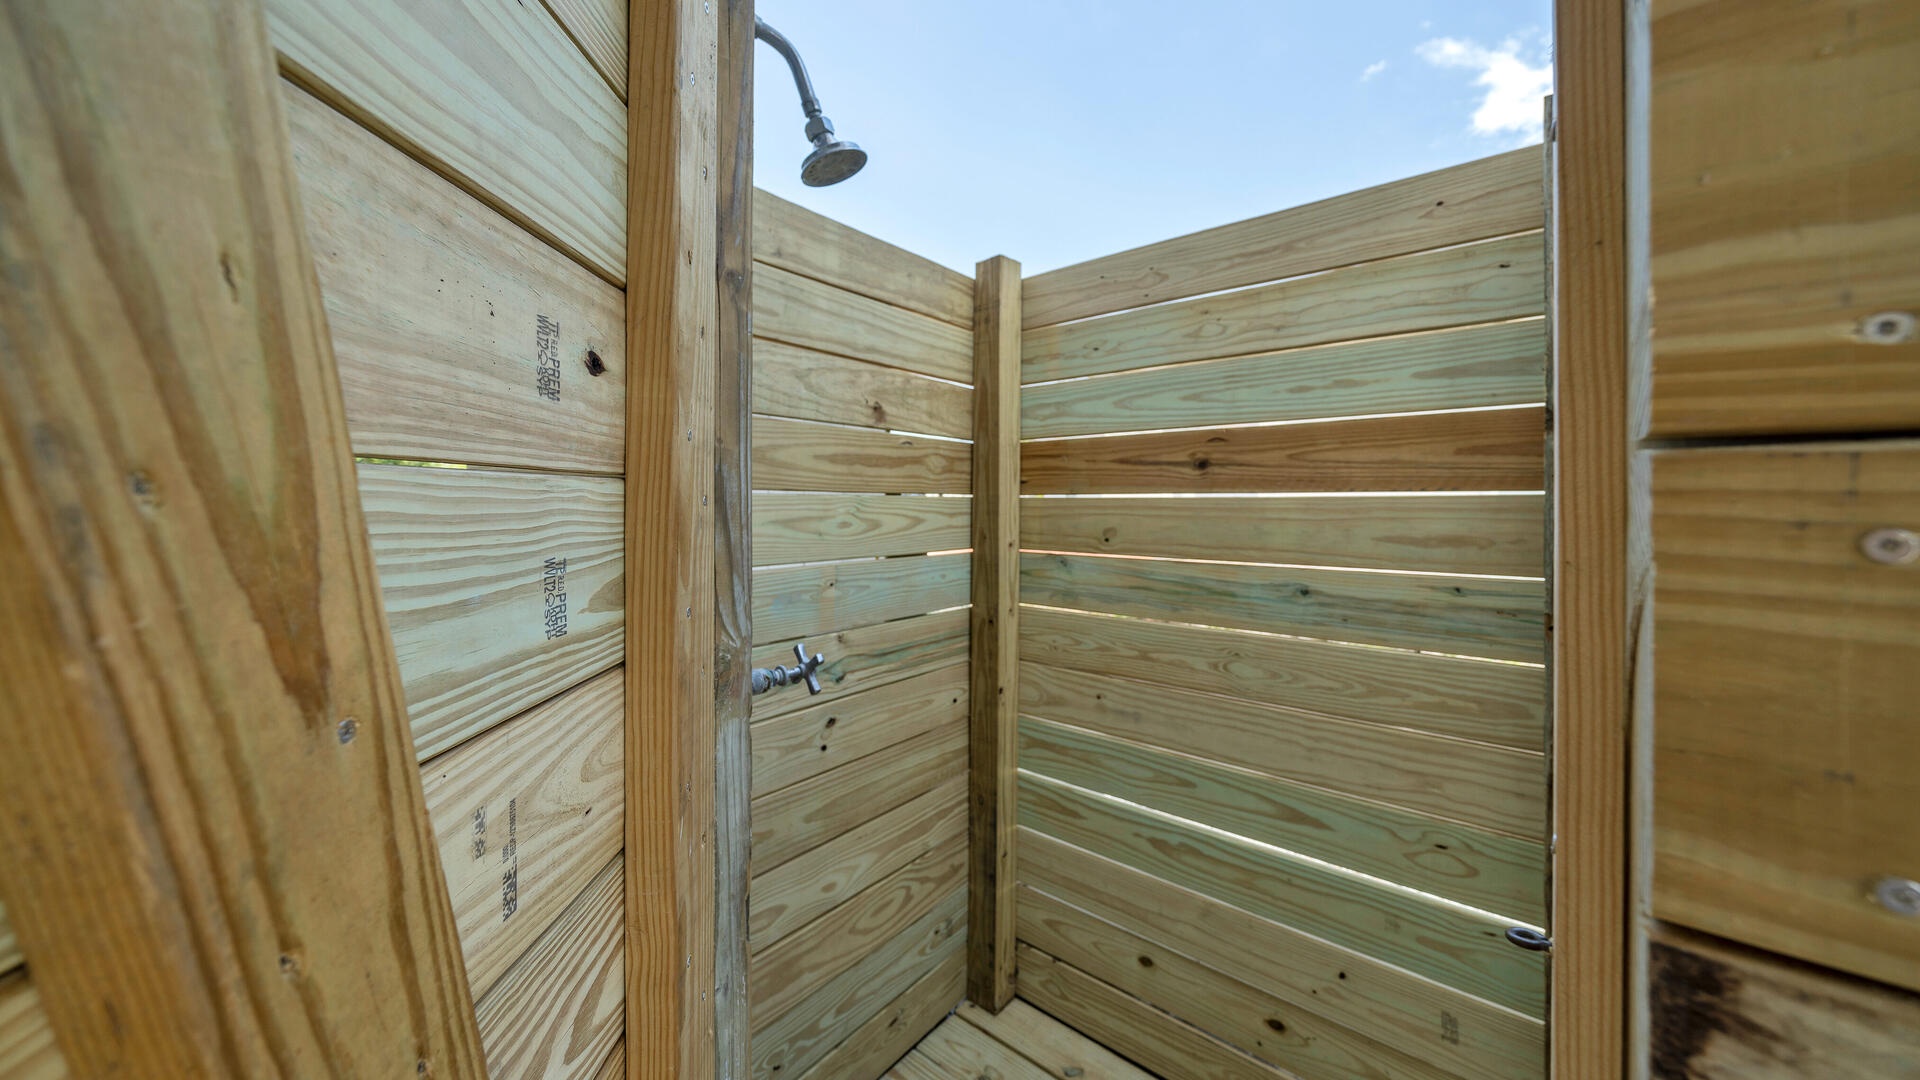 The outdoor shower is not to be missed - you will LOVE IT!!!!